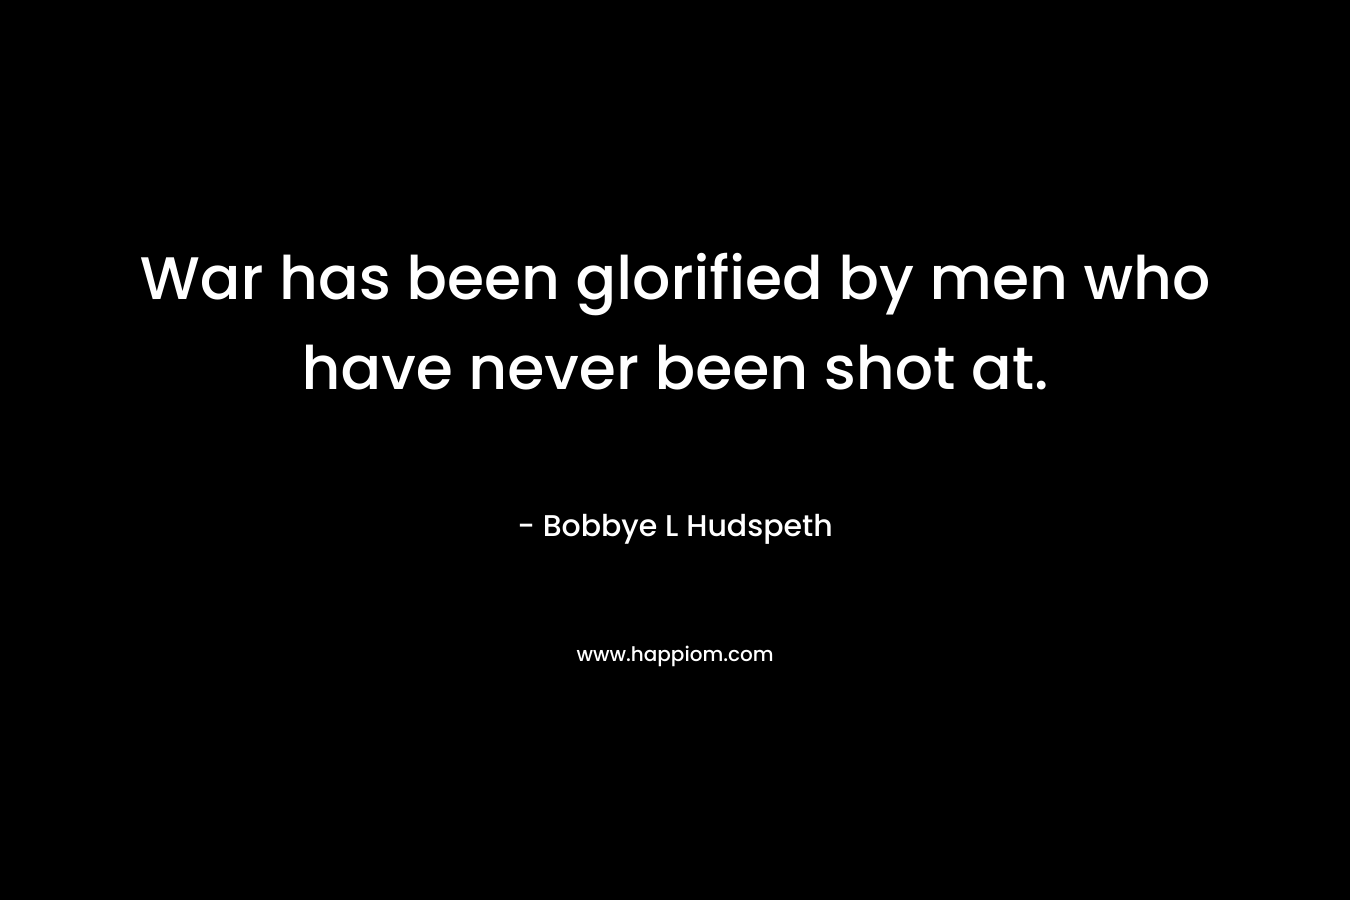 War has been glorified by men who have never been shot at. – Bobbye L Hudspeth